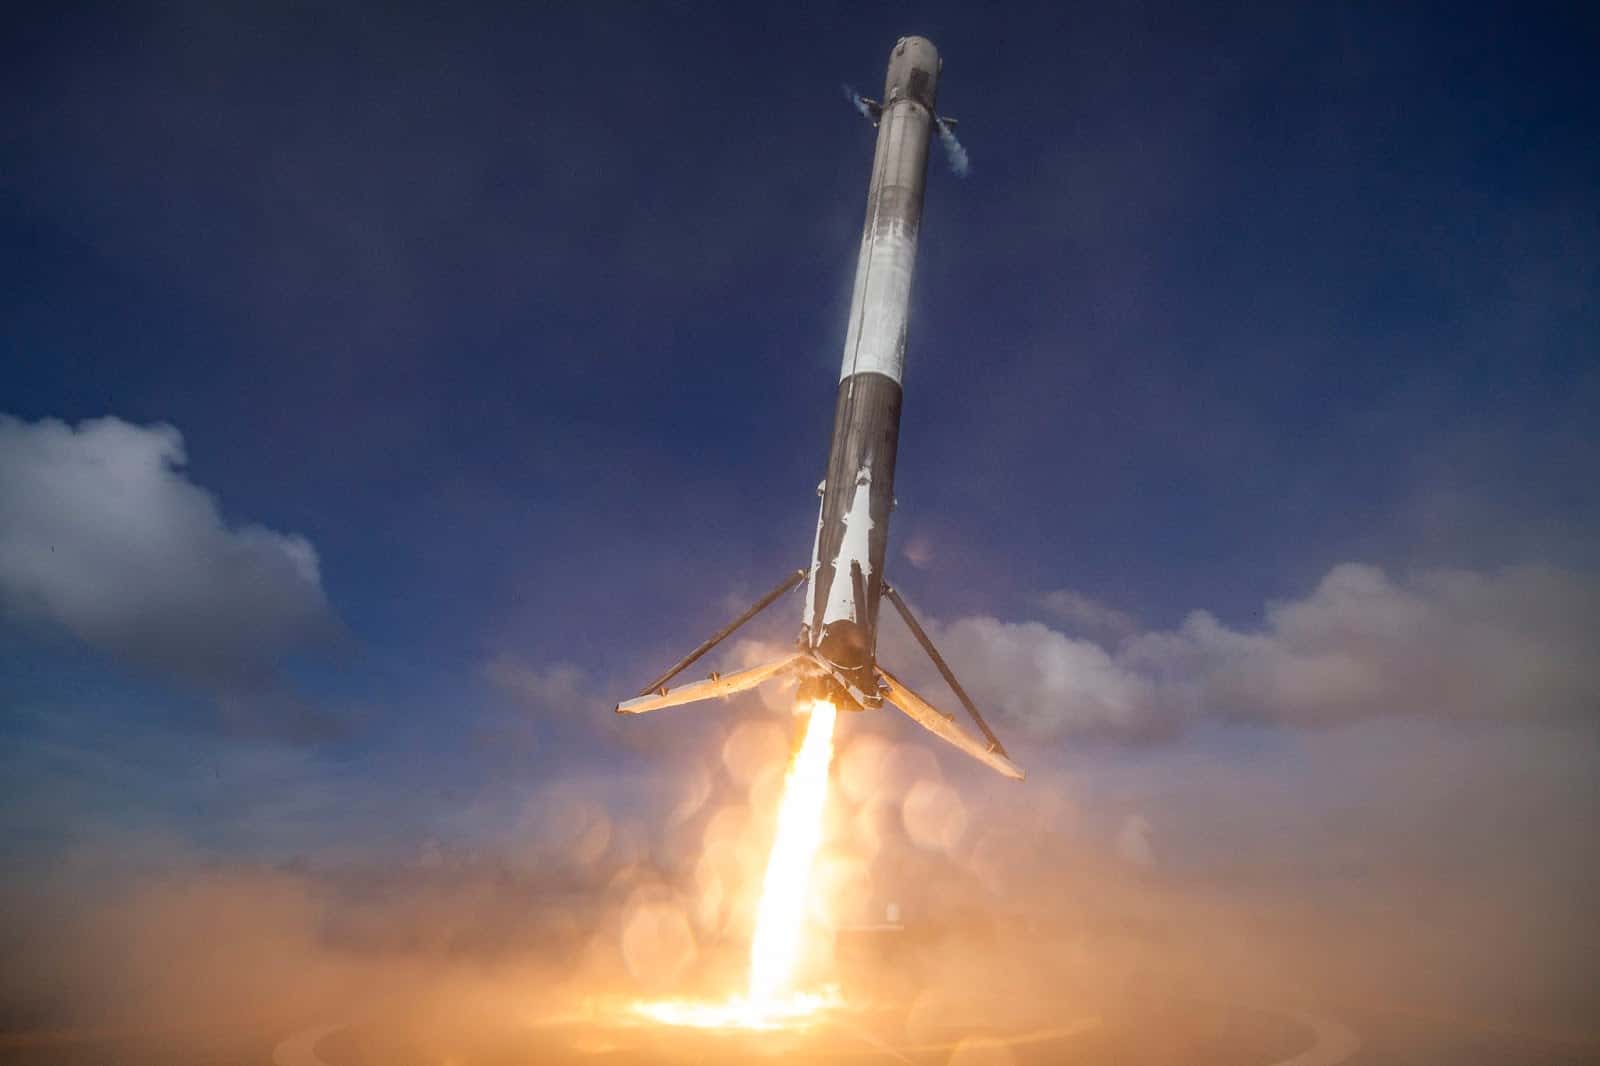 <p>One of SpaceX’s loftiest and most important goals in the success of their company is to create completely reusable rockets. In 2017, they started to fulfill this goal by staging the first re-flight of an orbital class rocket ever. The reason this is such an important goal for the company is significantly reduced costs attached to flying rockets. Most of the price of launching rockets is actually in their construction. It makes sense, too. Airplanes are reused multiple times a day for travel—why not rockets?</p>